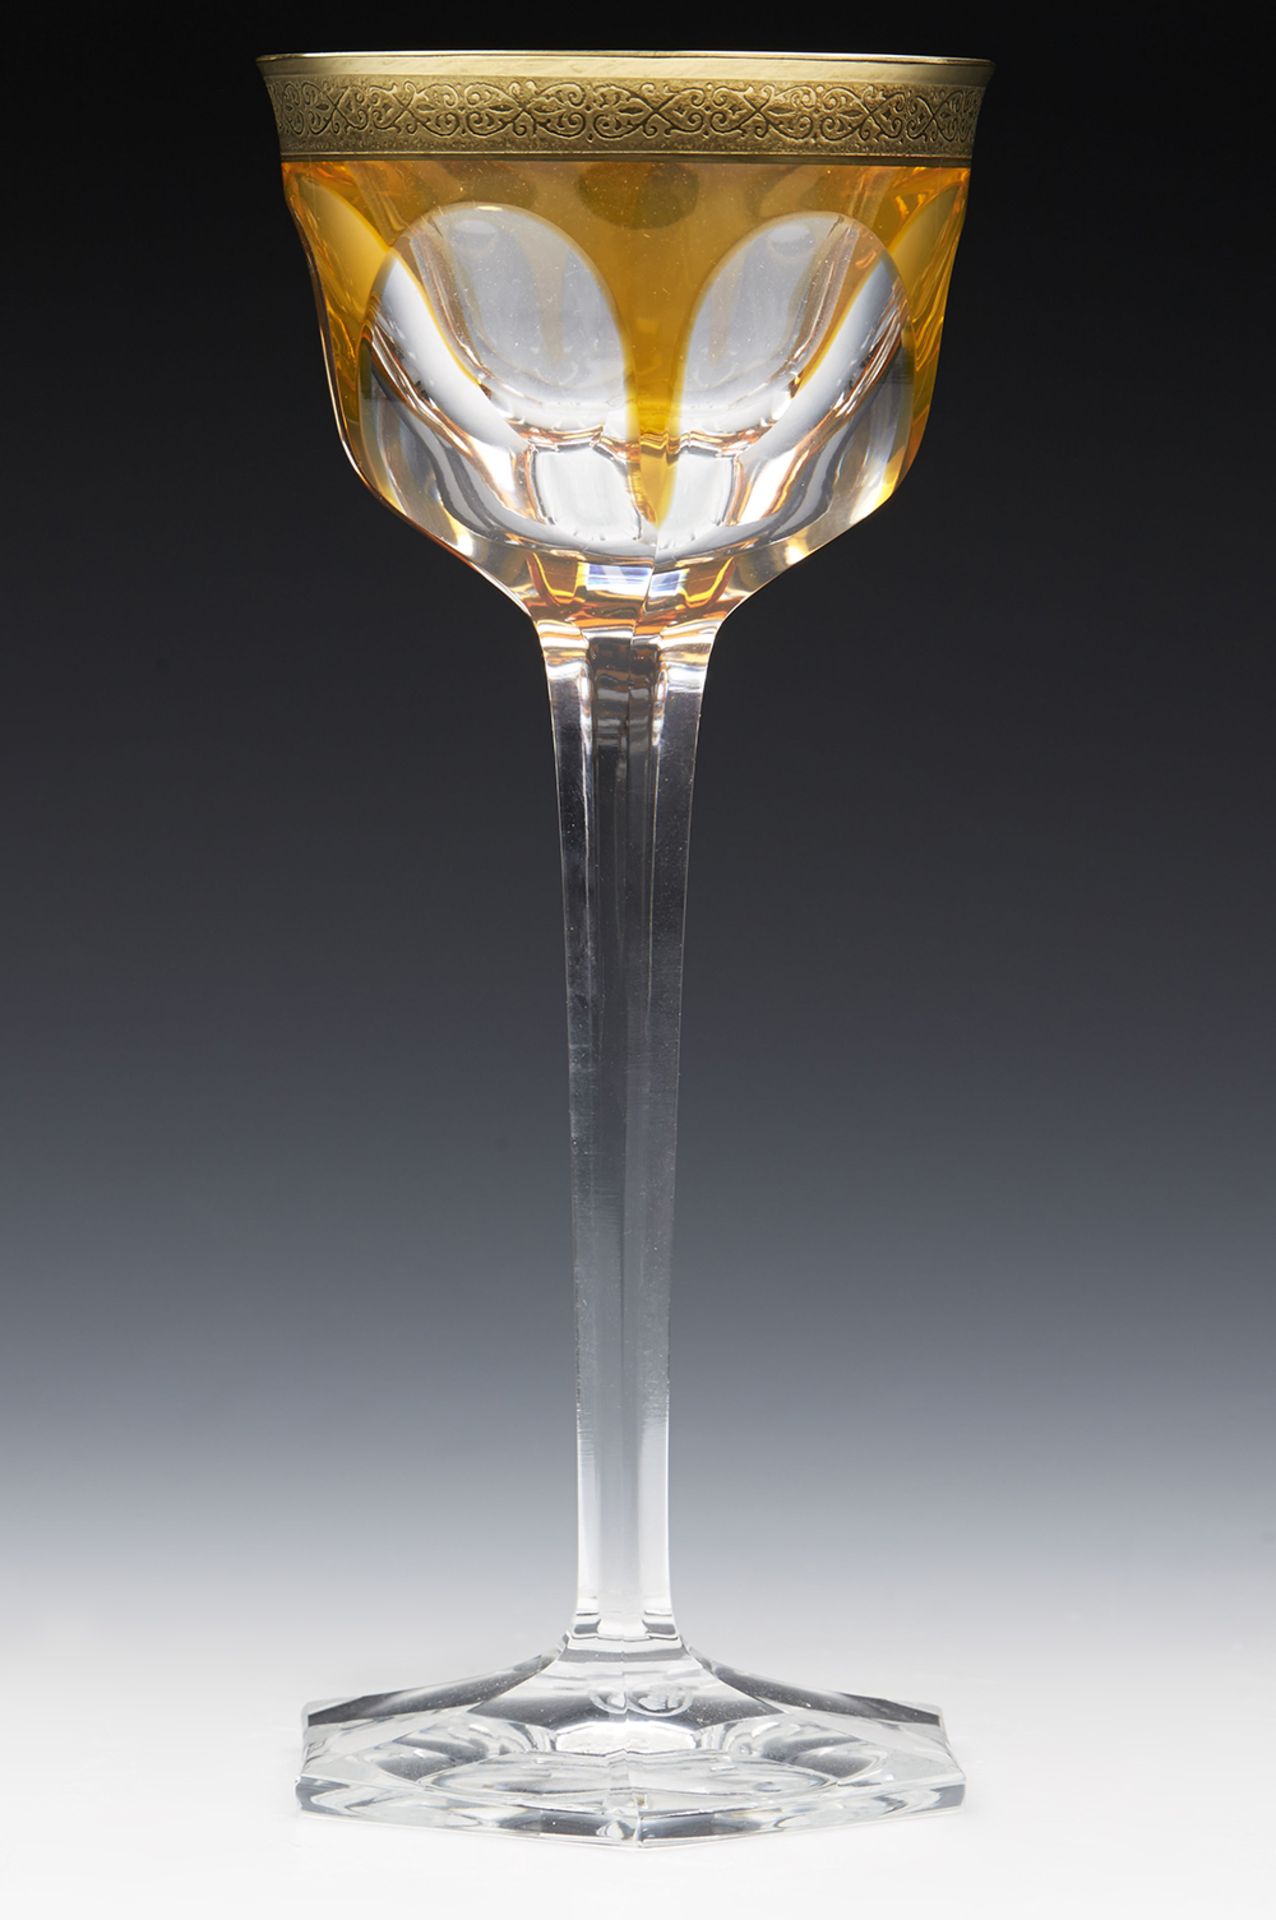 Vintage Moser Cut Crystal Amber Overlay Wine Glass With Gilded Design 20Th C. - Image 7 of 7